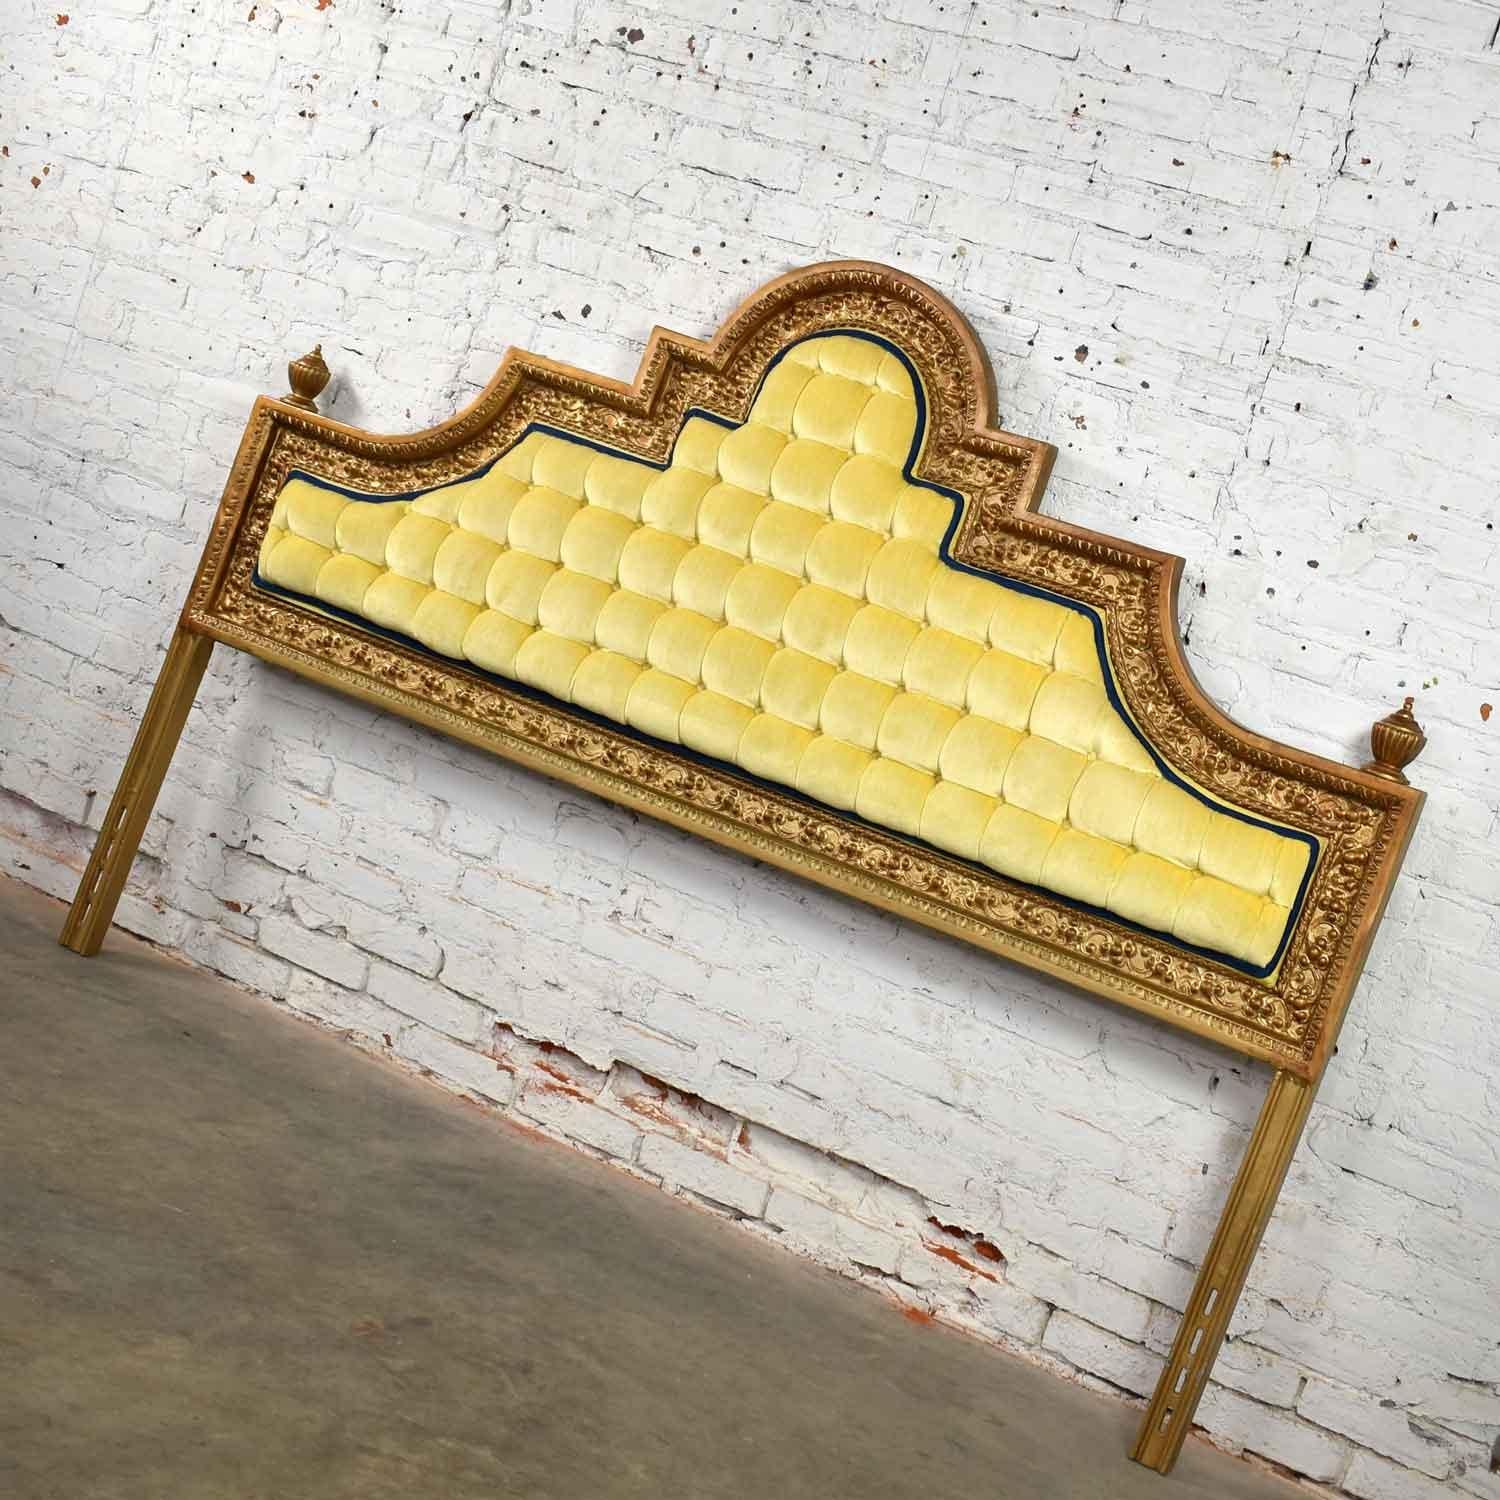 Magnificent Kessler Industries Inc. of El Paso, Texas Hollywood Regency headboard of cast aluminum that has been gilded, tufted, and upholstered in yellow velvet. It is in fabulous vintage condition with no outstanding flaws we have detected. Please